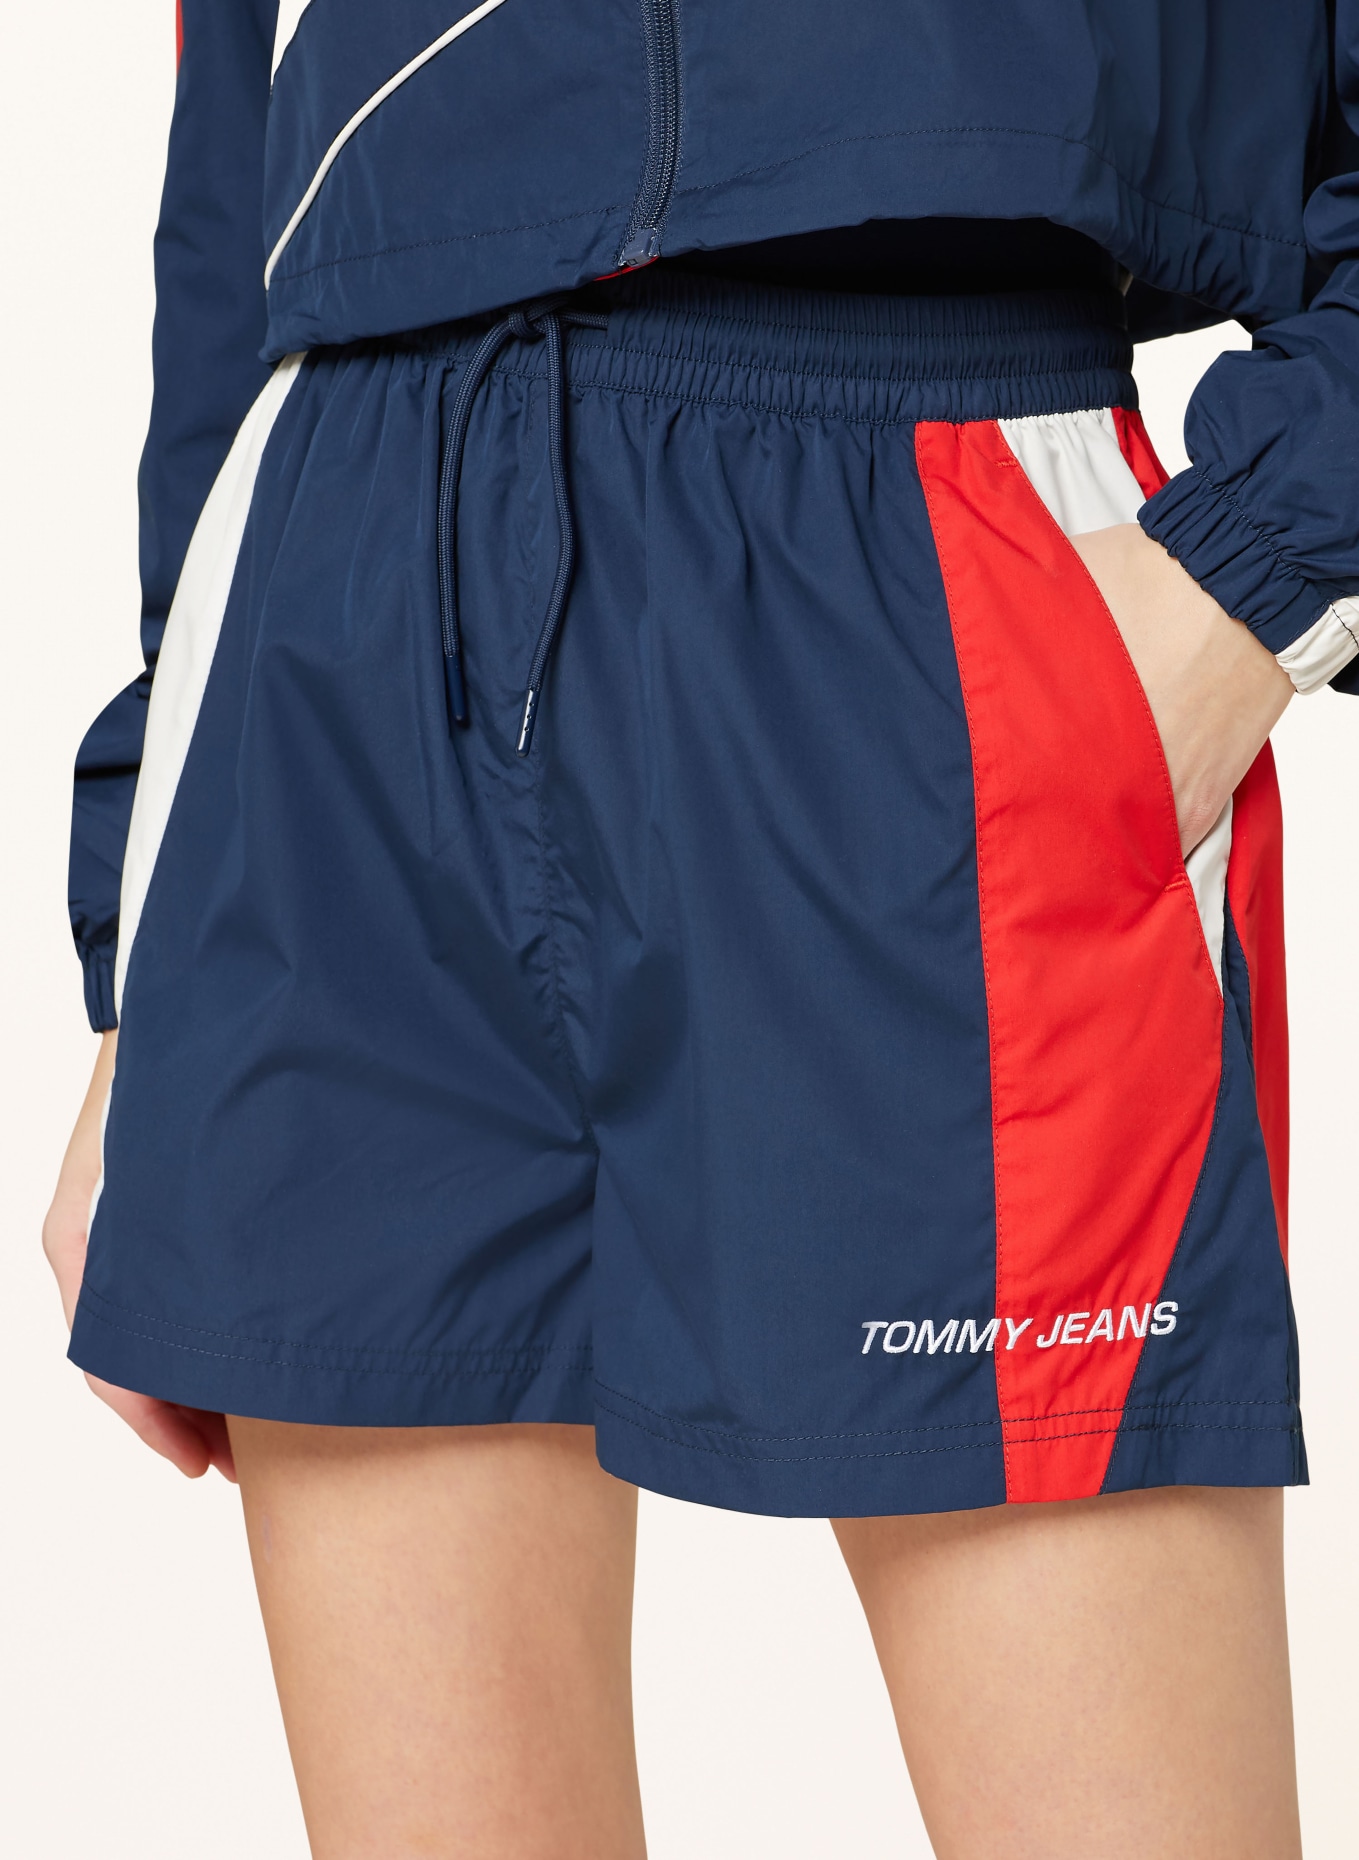 TOMMY JEANS Shorts, Farbe: DUNKELBLAU/ WEISS/ ROT (Bild 5)